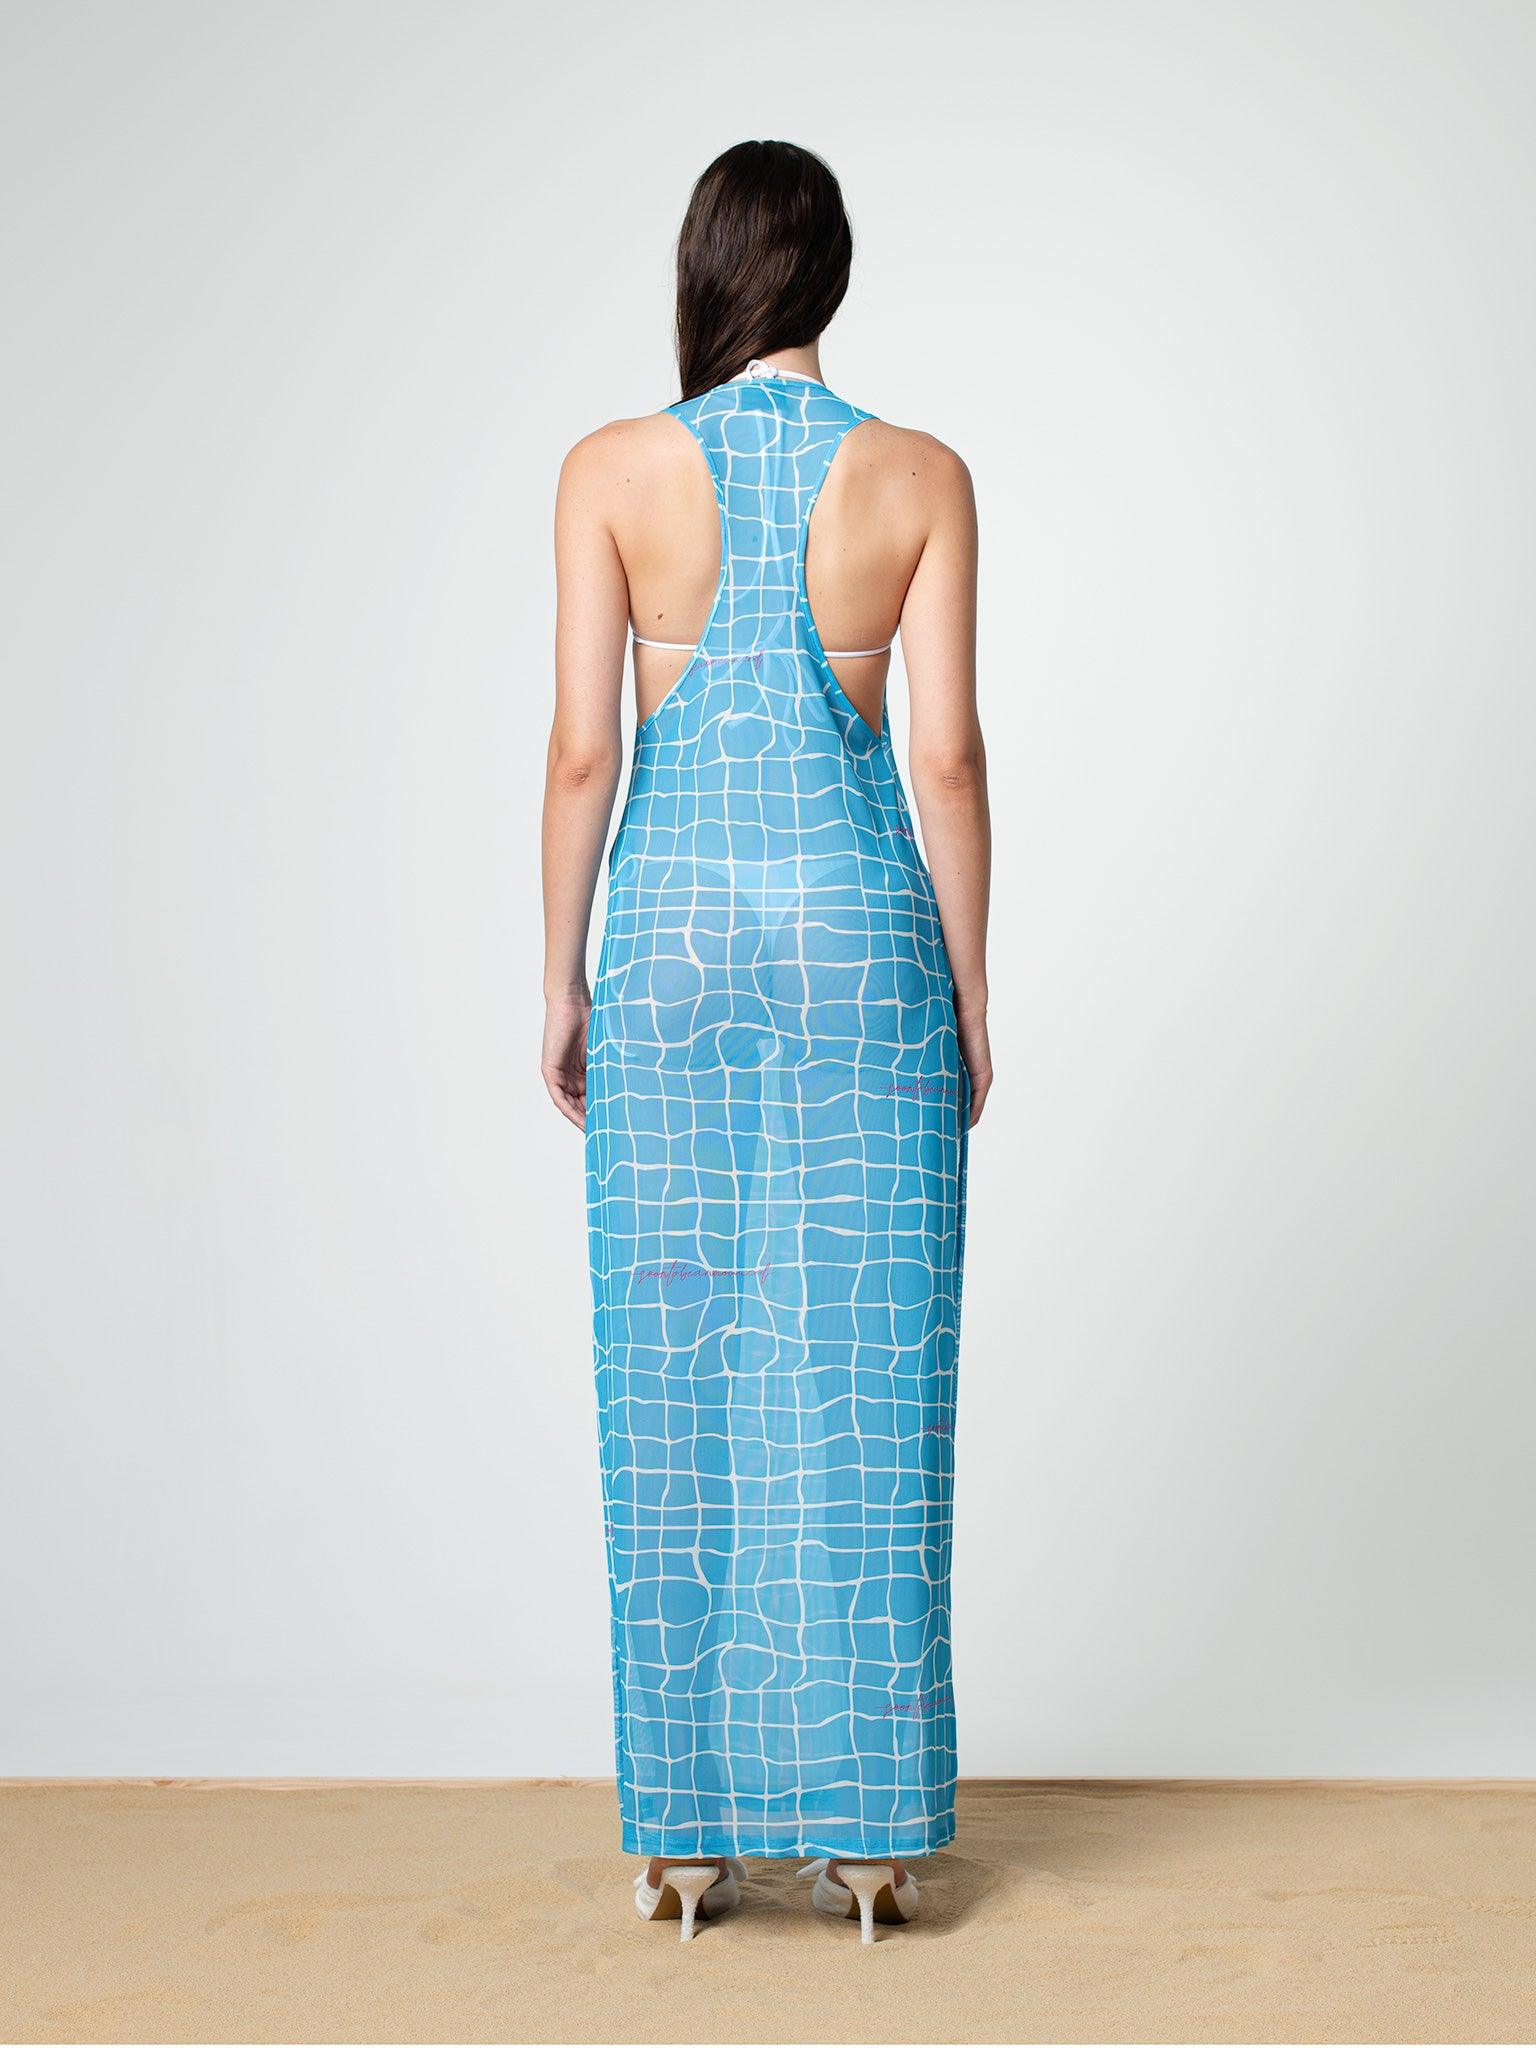 Pool Tile Mesh Dress - SOON TO BE ANNOUNCED